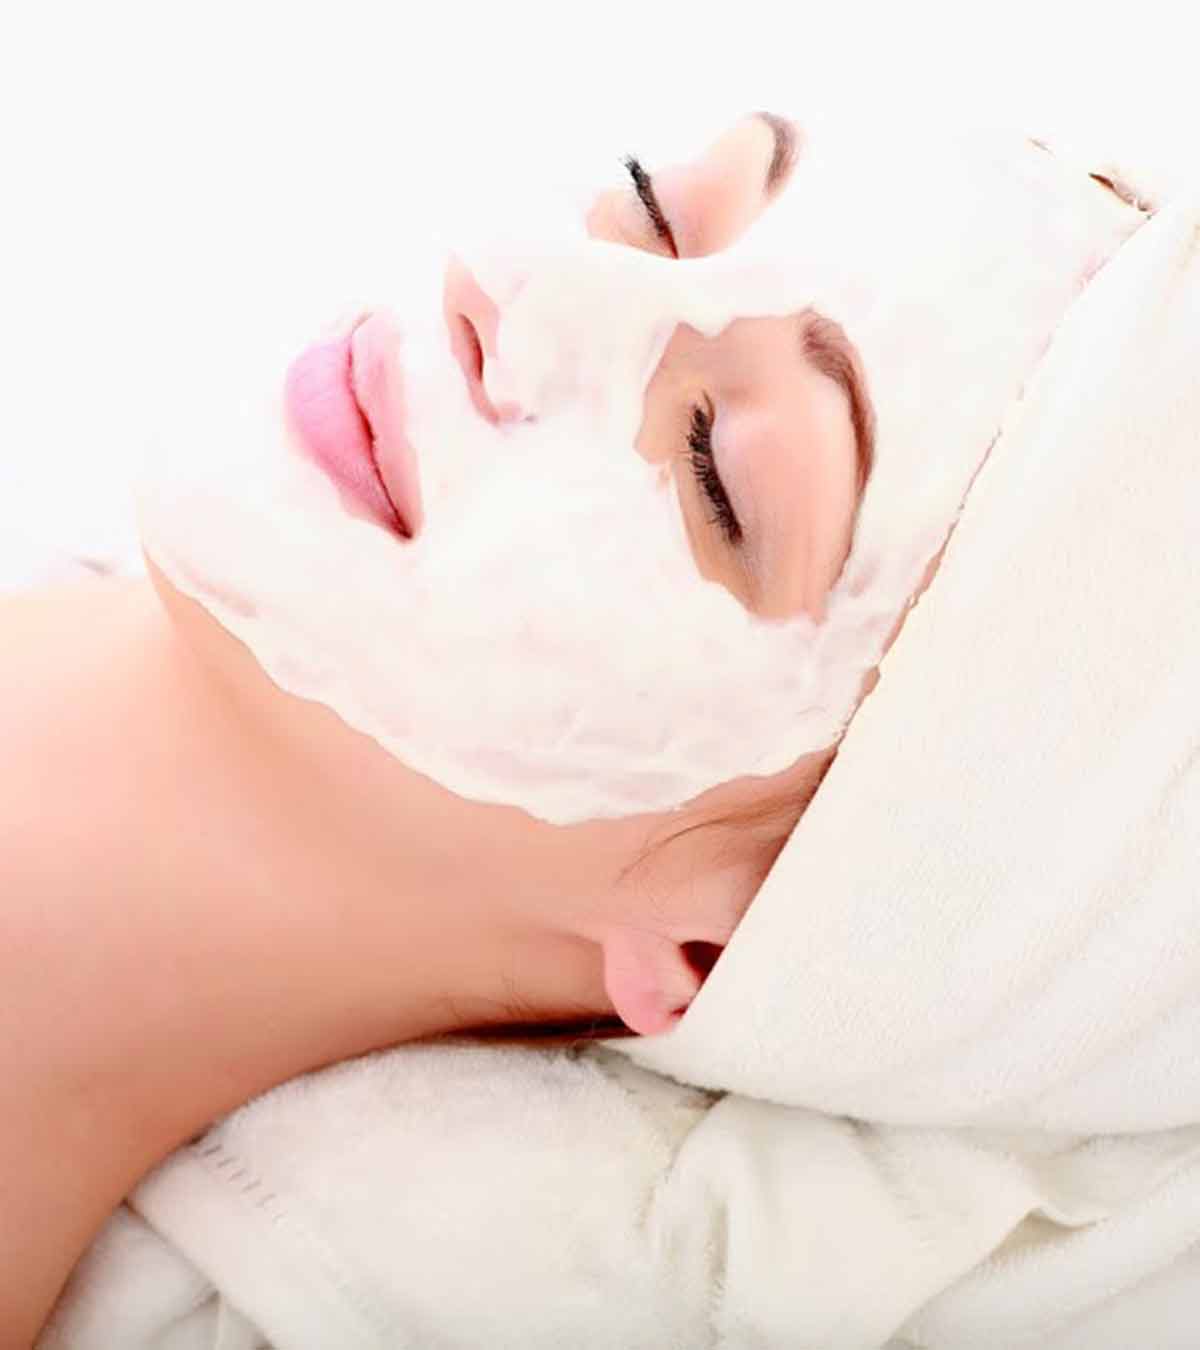 Facial Bleaching During Pregnancy - Is It Safe?